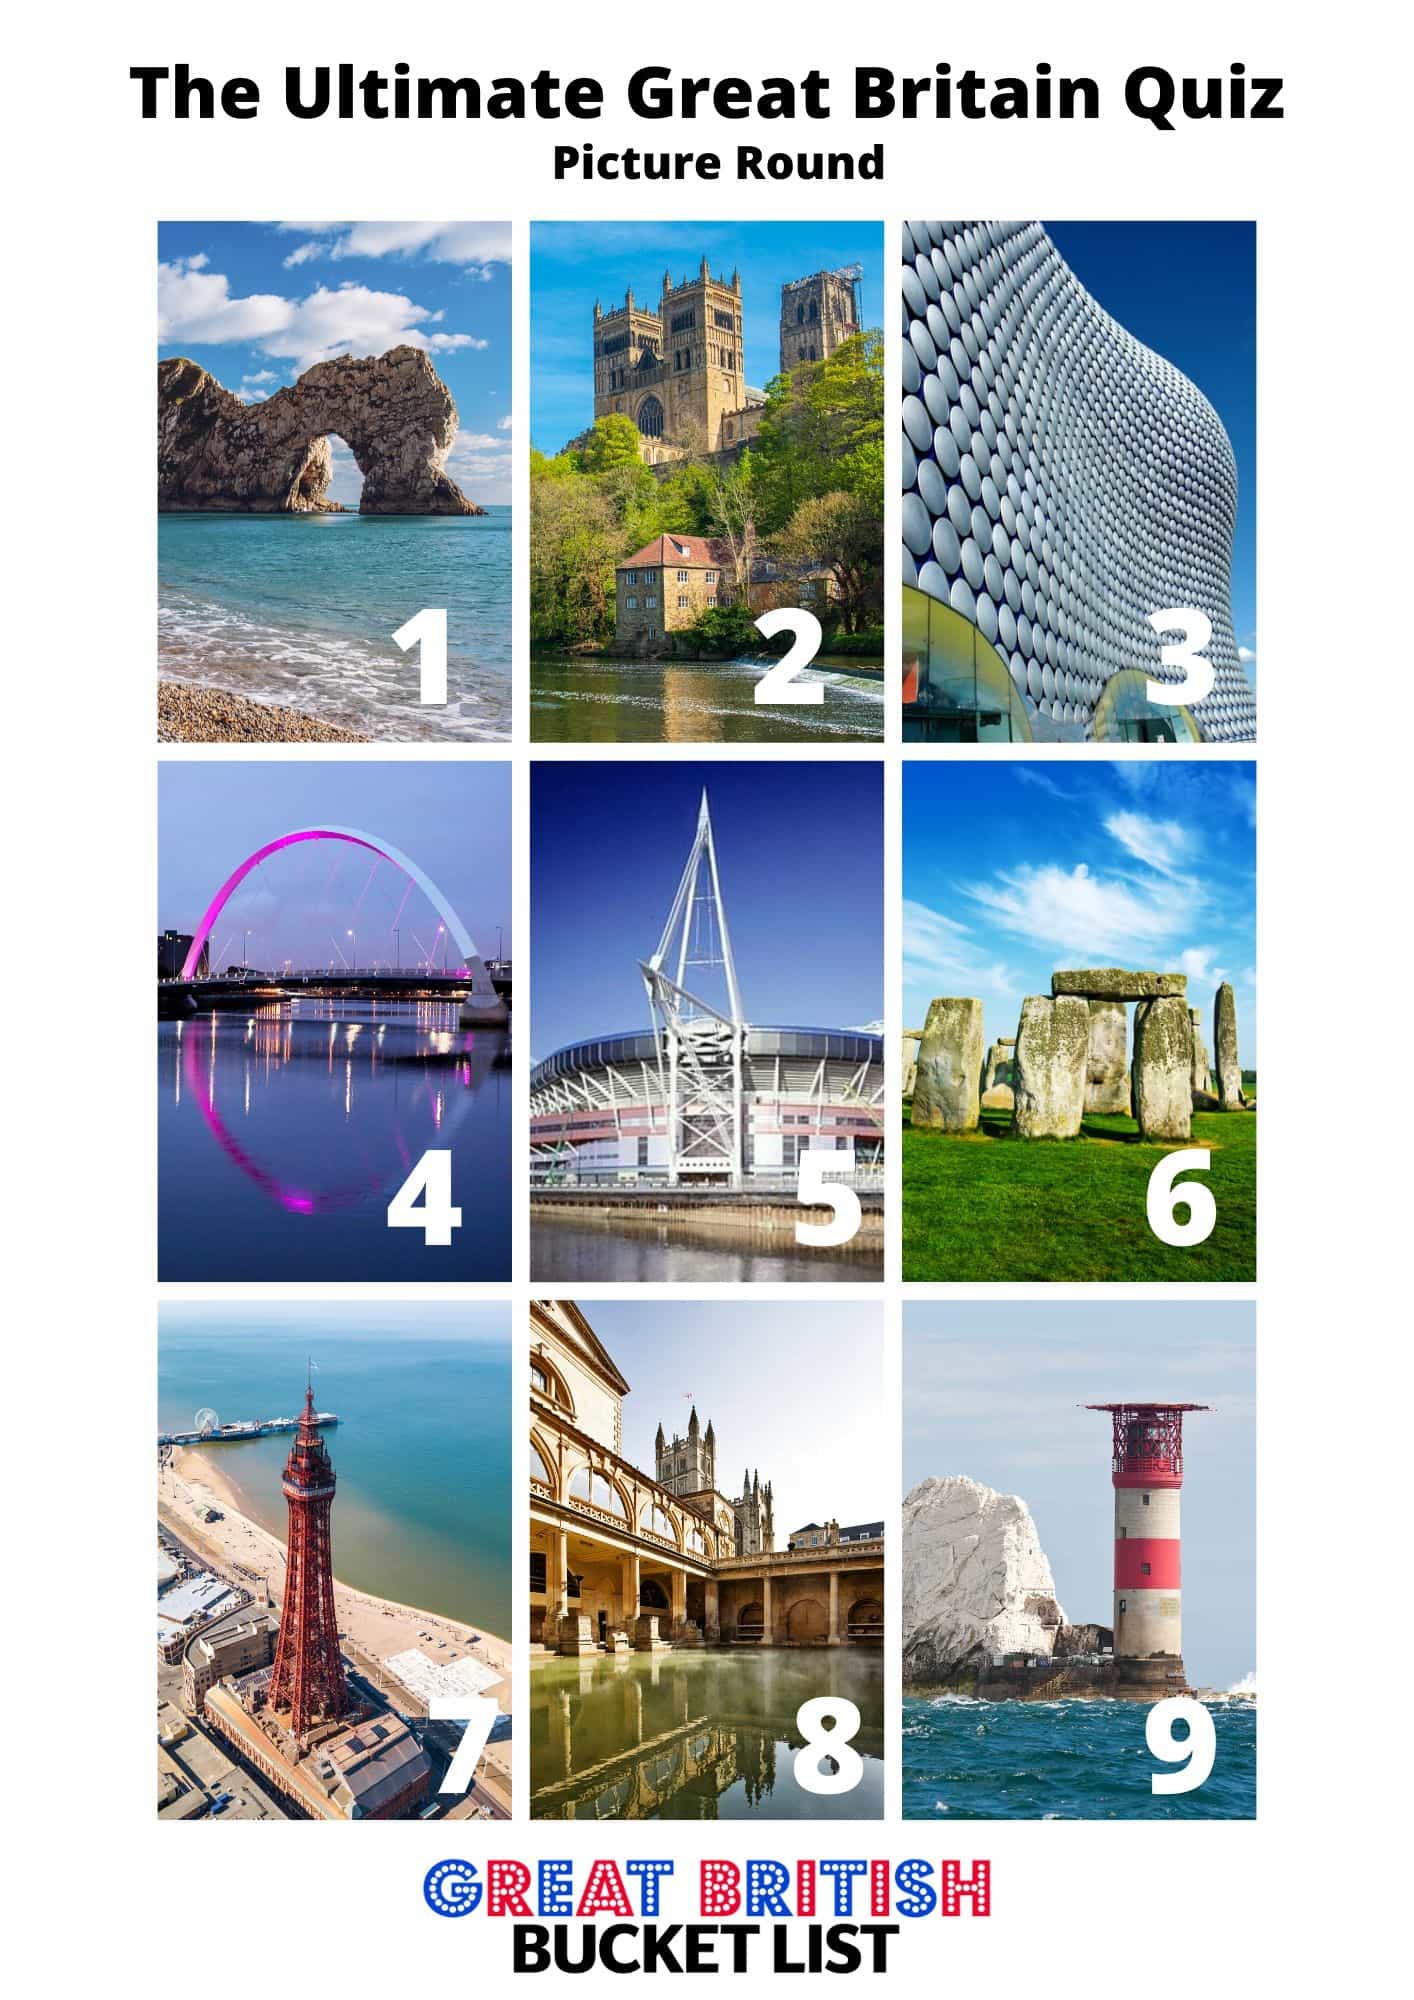 The Ultimate Great Britain Quiz - picture round